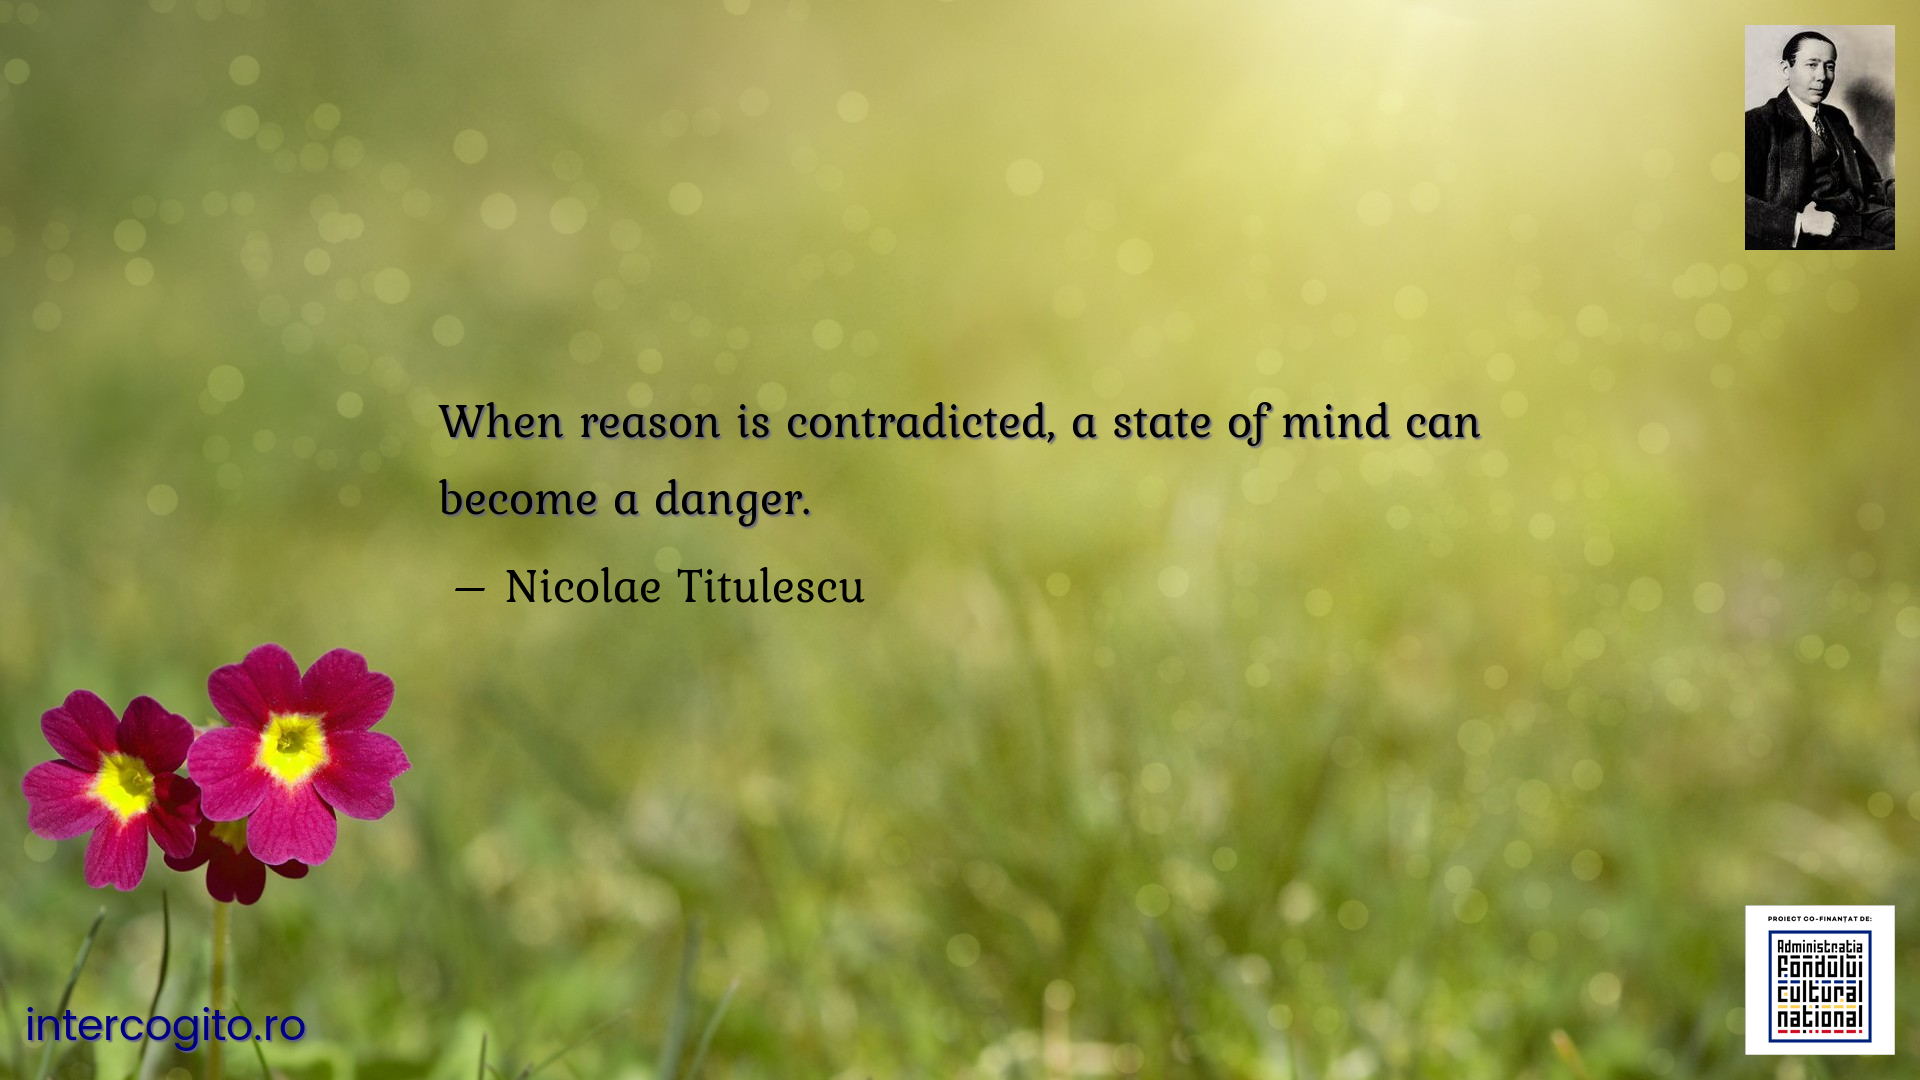 When reason is contradicted, a state of mind can become a danger.